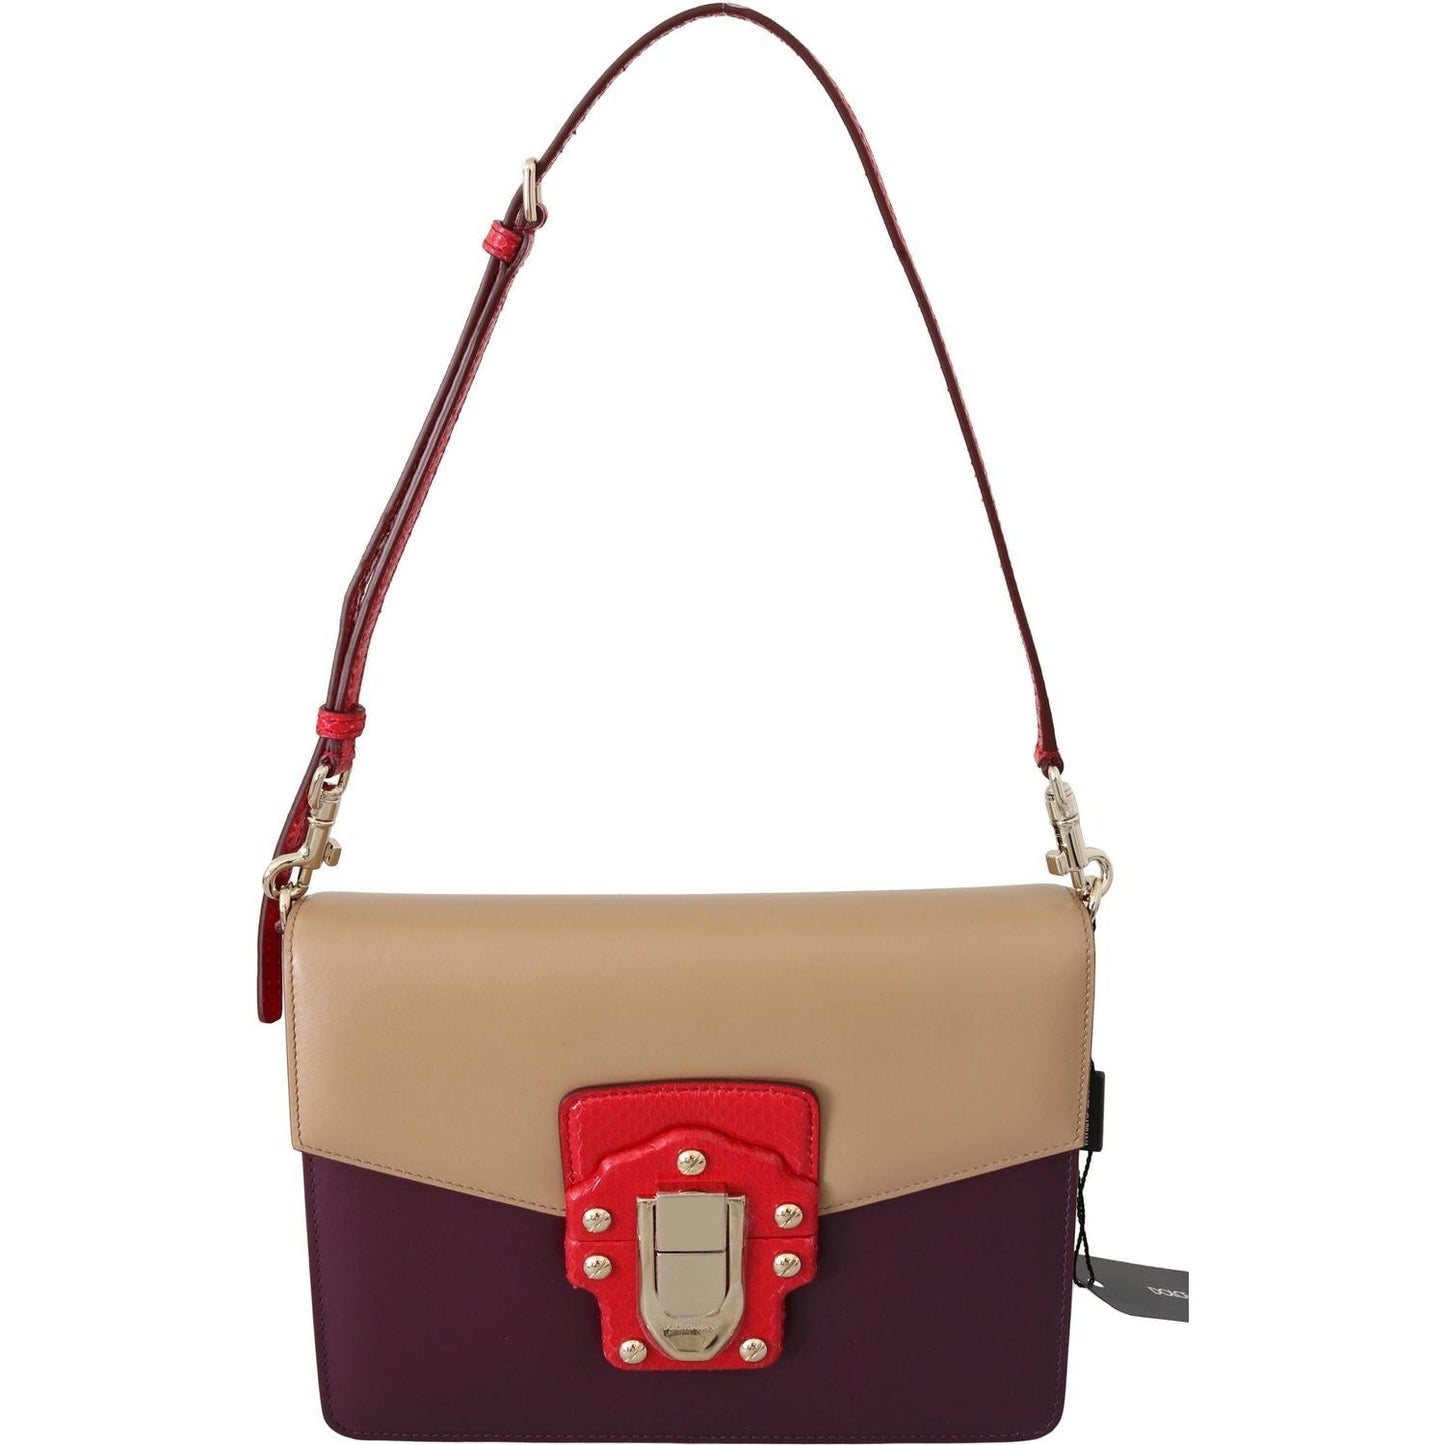 Dolce & Gabbana Exquisite LUCIA Leather Shoulder Bag Purse purple-beige-red-leather-crossbody-purse-bag IMG_0373-2-scaled-e6aeb2f5-bb5.jpg